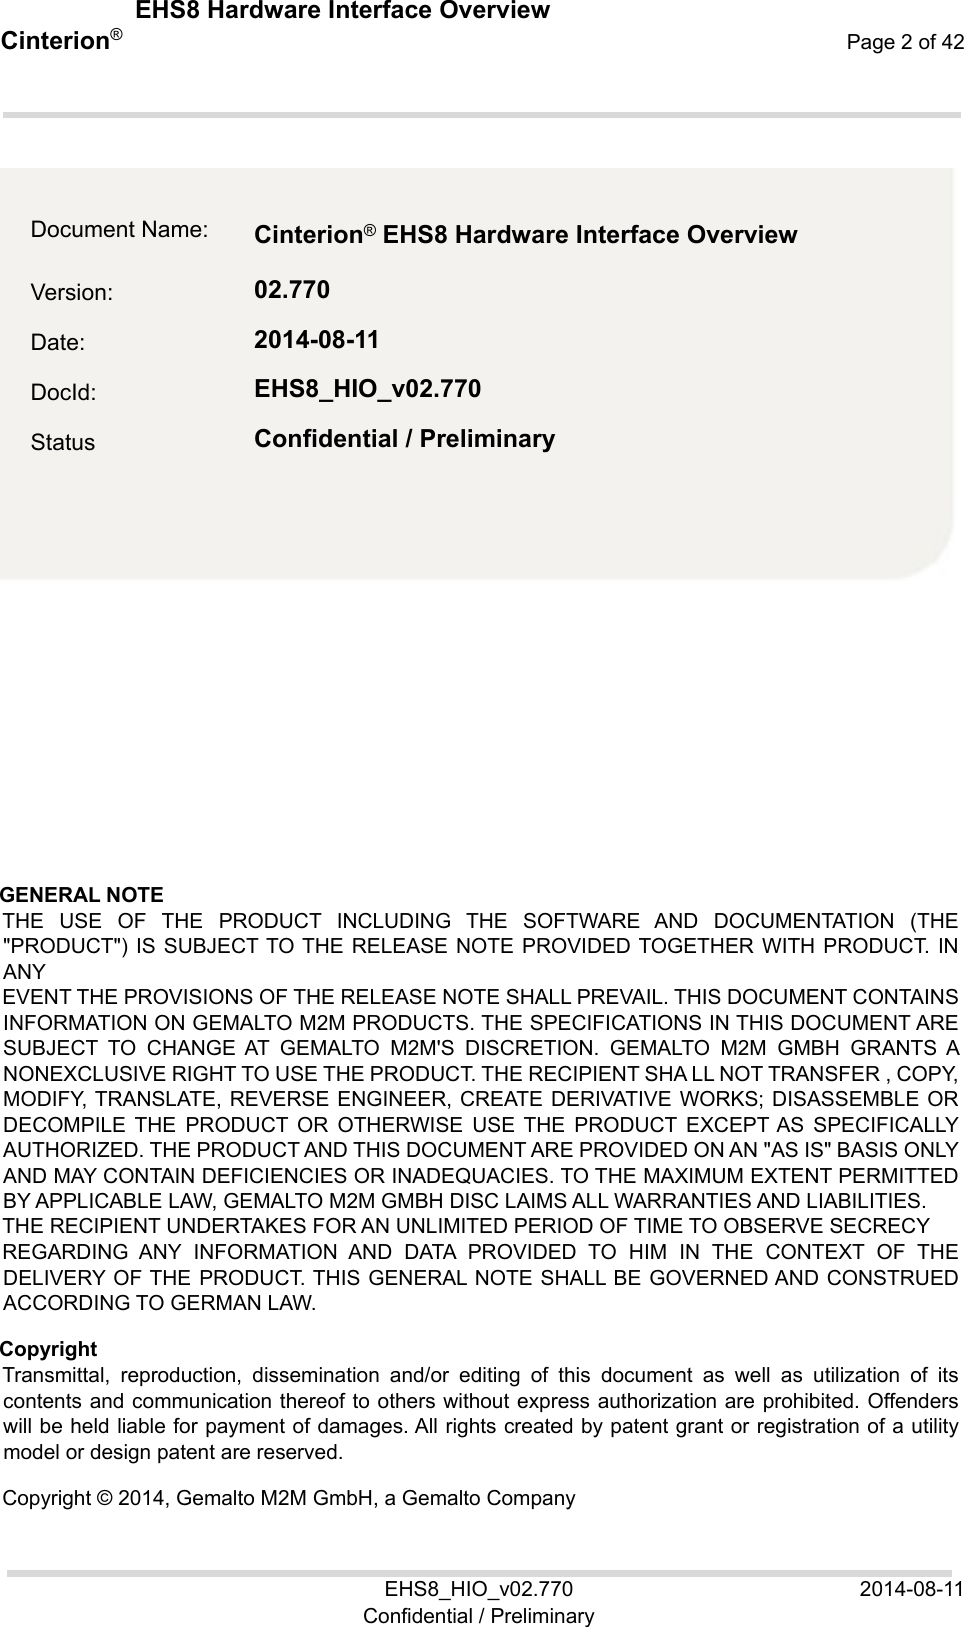  EHS8 Hardware Interface Overview EHS8_HIO_v02.770  2014-08-11 Confidential / Preliminary Cinterion®  Page 2 of 42 2  GENERAL NOTE  THE  USE  OF  THE  PRODUCT  INCLUDING  THE  SOFTWARE  AND  DOCUMENTATION (THE &quot;PRODUCT&quot;) IS SUBJECT TO THE RELEASE NOTE PROVIDED TOGETHER WITH PRODUCT. IN ANY EVENT THE PROVISIONS OF THE RELEASE NOTE SHALL PREVAIL. THIS DOCUMENT CONTAINS INFORMATION ON GEMALTO M2M PRODUCTS. THE SPECIFICATIONS IN THIS DOCUMENT ARE SUBJECT  TO  CHANGE  AT  GEMALTO  M2M&apos;S  DISCRETION.  GEMALTO  M2M  GMBH GRANTS A NONEXCLUSIVE RIGHT TO USE THE PRODUCT. THE RECIPIENT SHA LL NOT TRANSFER , COPY, MODIFY, TRANSLATE, REVERSE ENGINEER, CREATE  DERIVATIVE WORKS; DISASSEMBLE OR DECOMPILE  THE  PRODUCT  OR  OTHERWISE  USE  THE  PRODUCT  EXCEPT AS  SPECIFICALLY AUTHORIZED. THE PRODUCT AND THIS DOCUMENT ARE PROVIDED ON AN &quot;AS IS&quot; BASIS ONLY AND MAY CONTAIN DEFICIENCIES OR INADEQUACIES. TO THE MAXIMUM EXTENT PERMITTED BY APPLICABLE LAW, GEMALTO M2M GMBH DISC LAIMS ALL WARRANTIES AND LIABILITIES. THE RECIPIENT UNDERTAKES FOR AN UNLIMITED PERIOD OF TIME TO OBSERVE SECRECY REGARDING  ANY  INFORMATION  AND  DATA  PROVIDED  TO  HIM  IN  THE  CONTEXT  OF  THE DELIVERY OF THE PRODUCT. THIS  GENERAL NOTE SHALL BE GOVERNED AND CONSTRUED ACCORDING TO GERMAN LAW. Copyright Transmittal,  reproduction,  dissemination  and/or  editing  of  this  document  as  well  as  utilization  of  its contents and communication thereof to others without express authorization are prohibited. Offenders will be held liable for payment of damages. All rights created by patent grant or registration of a utility model or design patent are reserved.  Copyright © 2014, Gemalto M2M GmbH, a Gemalto Company Document Name:  Cinterion ® EHS8 Hardware Interface Overview   Version:  02.770 Date:  2014-08-11 DocId:  EHS8_HIO_v02.770 Status  Confidential / Preliminary 